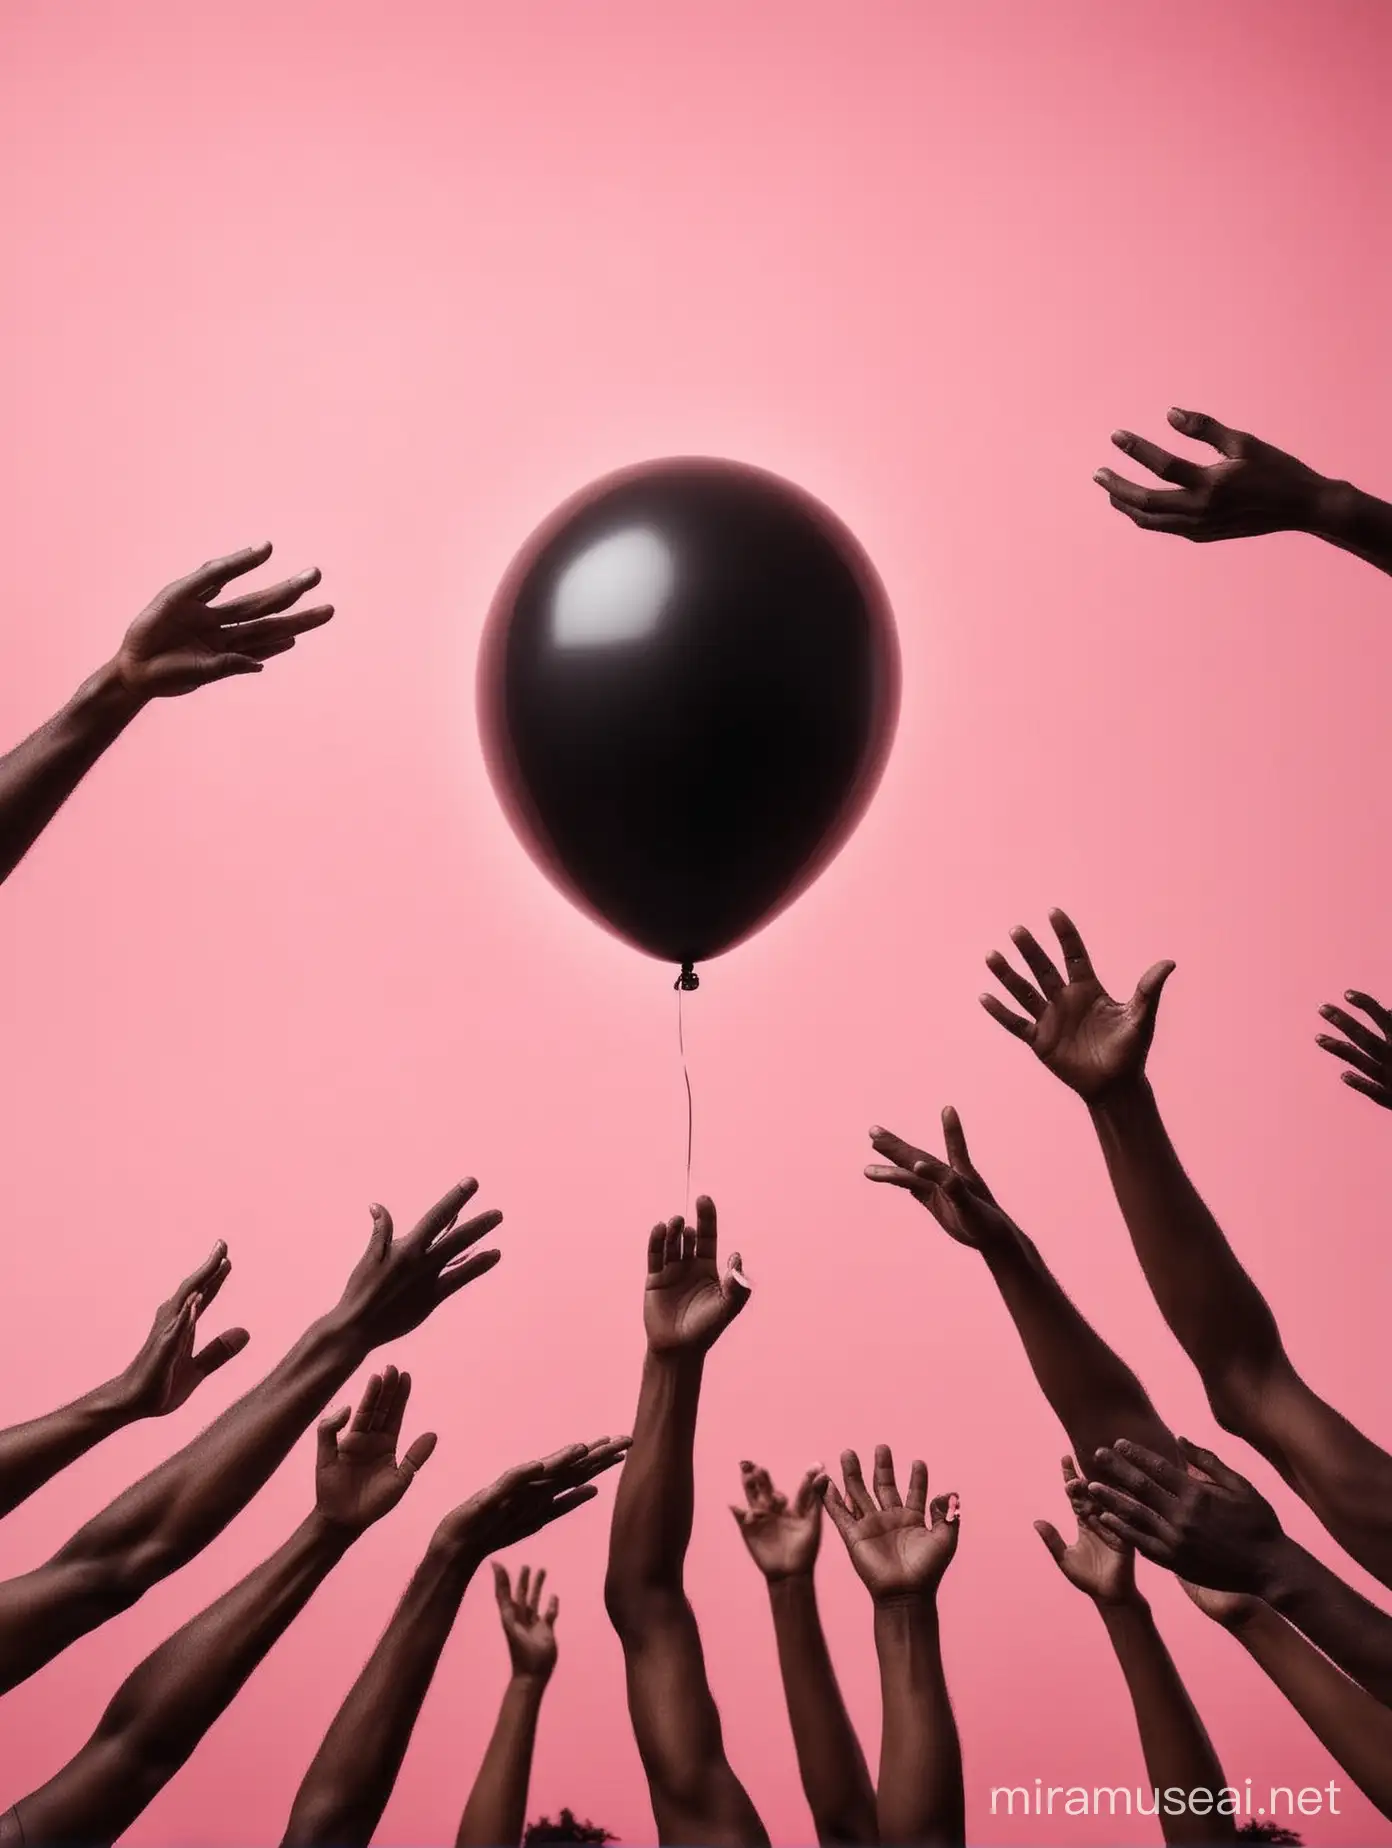 Many mens' hands reaching up towards a burning black balloon against a glossy pink background